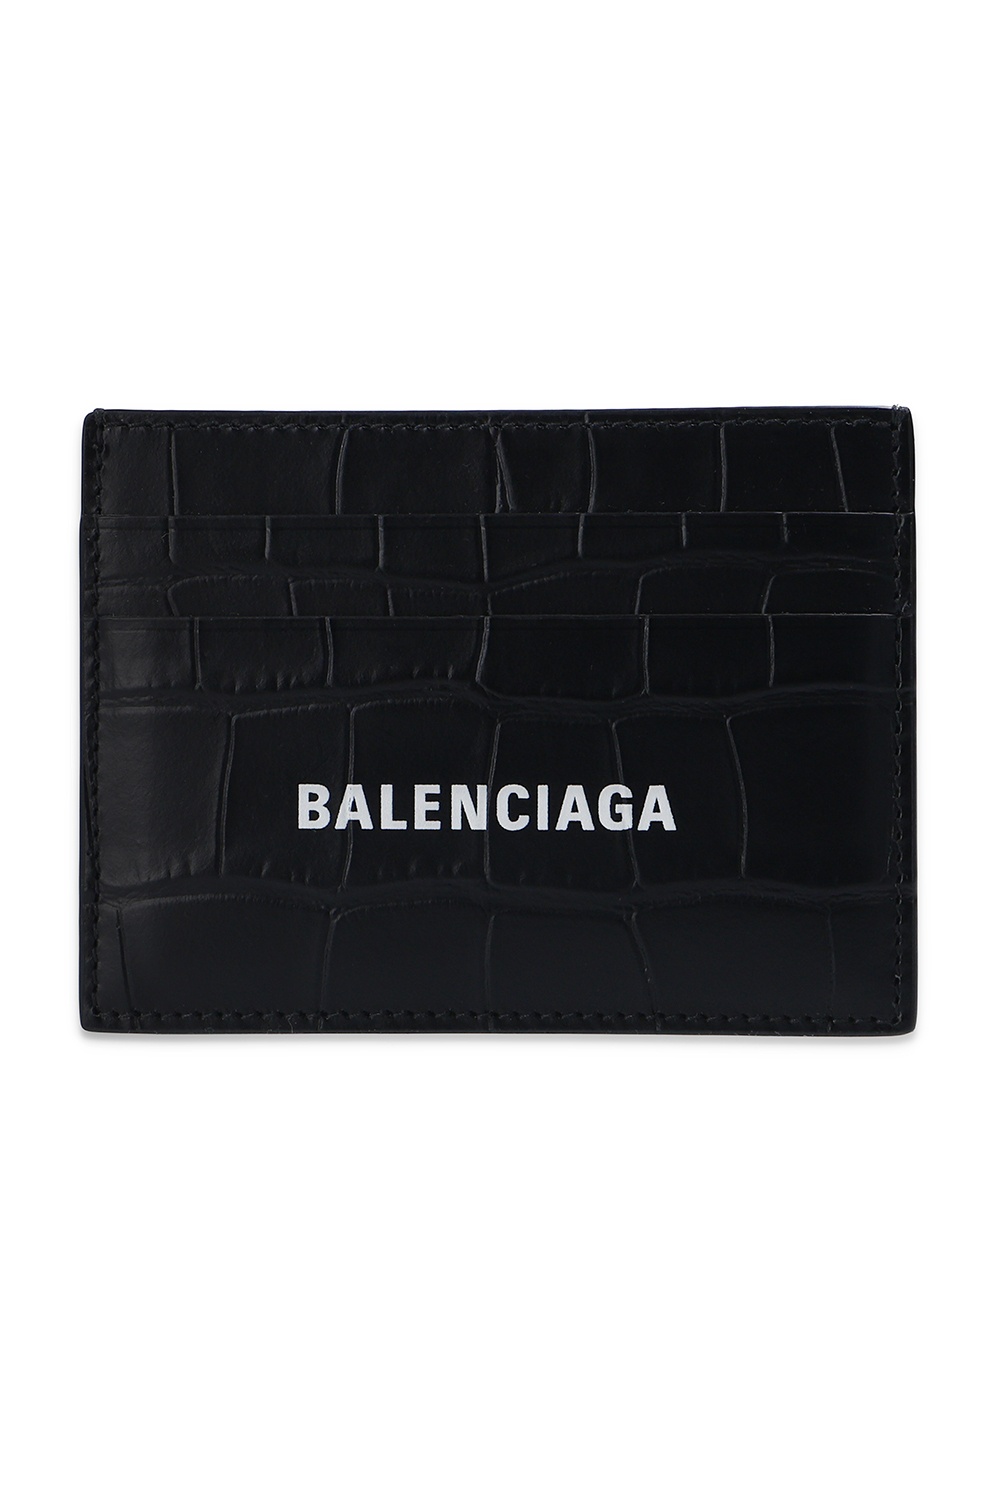 Balenciaga BE A ROLE MODEL FOR OTHERS